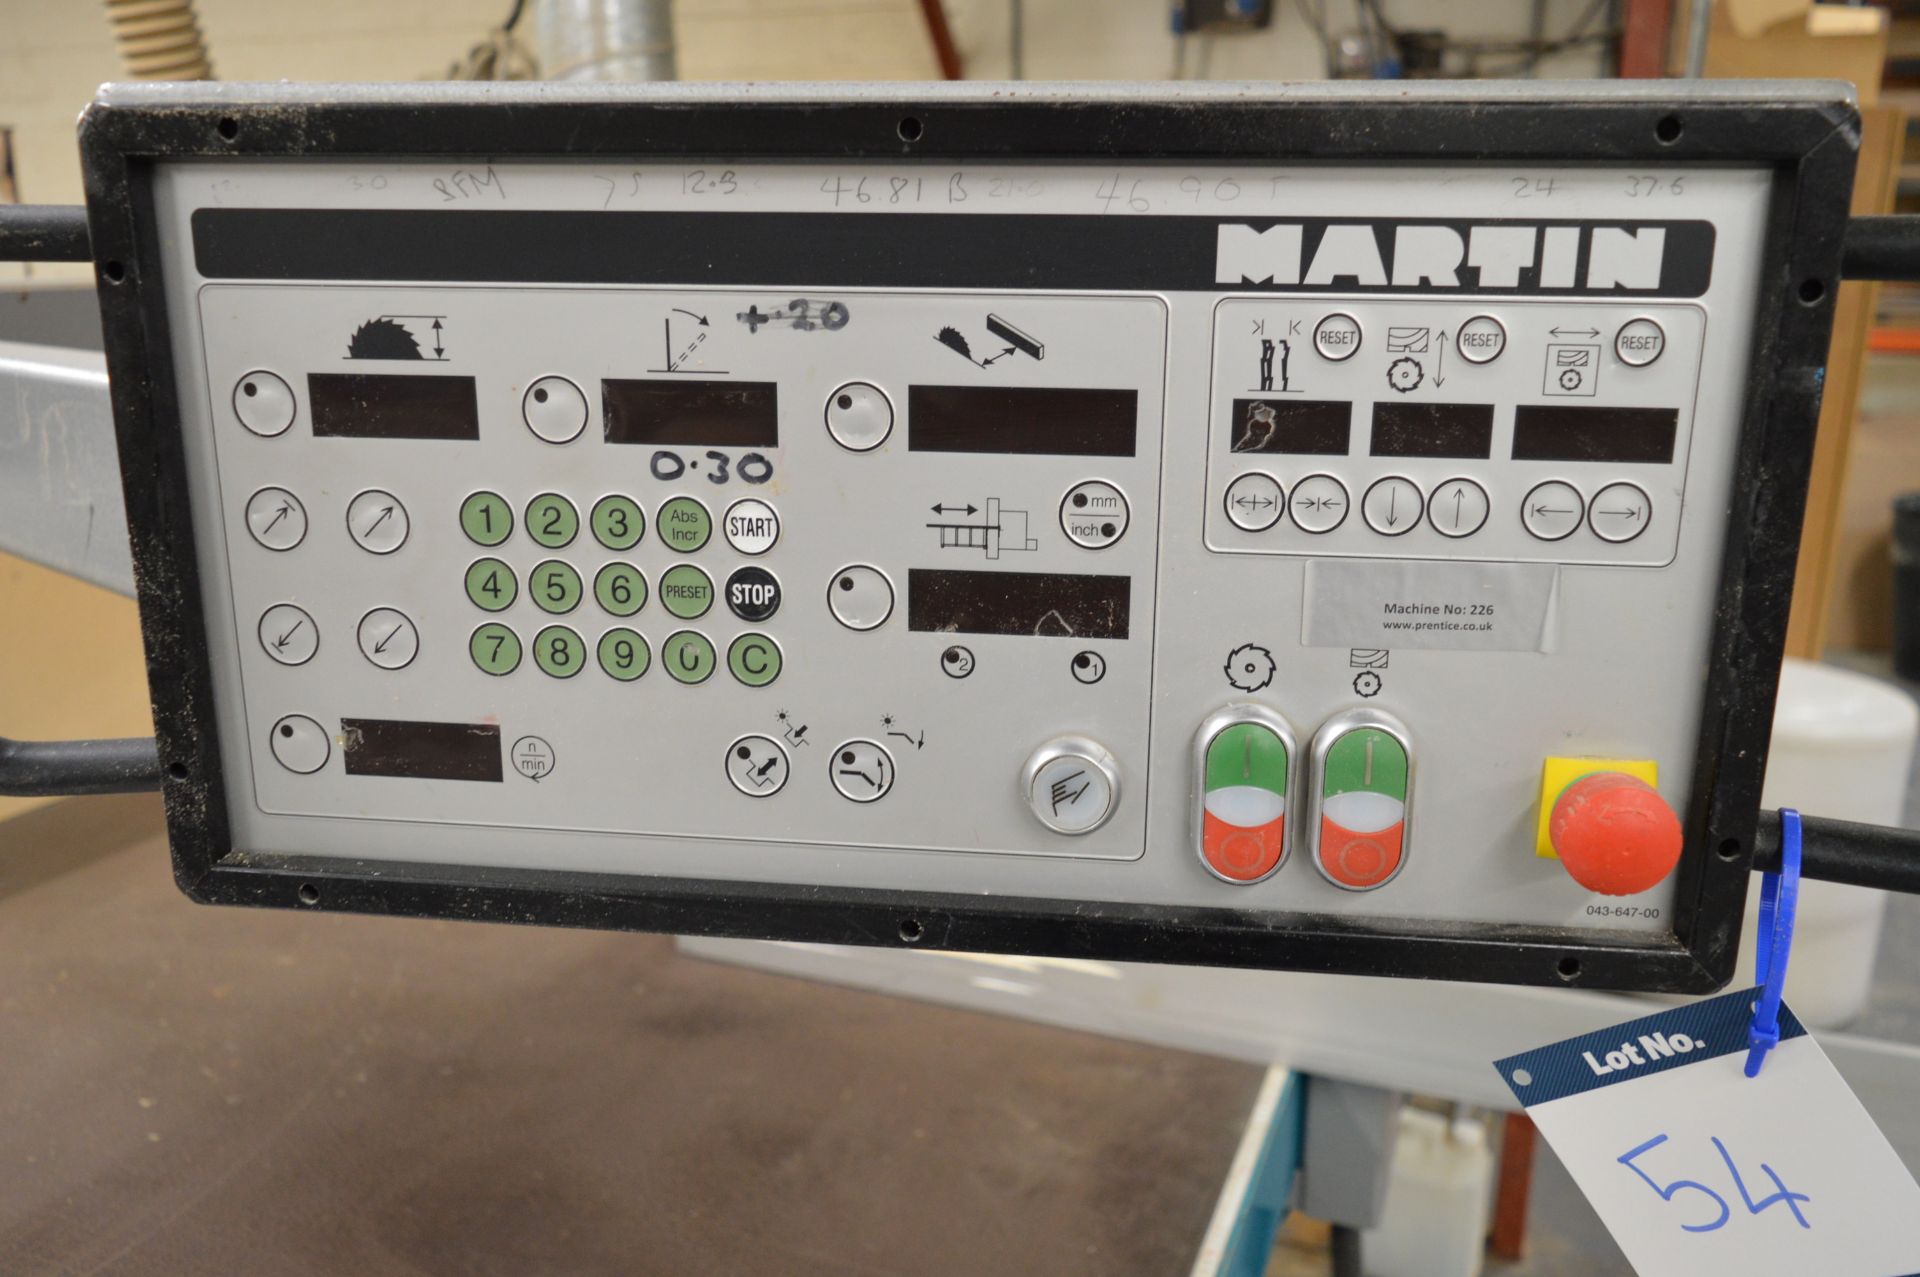 Martin T73 automatic sliding panel saw, Serial No. V429906 (2002), Saw Blade. Min 250mm / Max. - Image 5 of 7